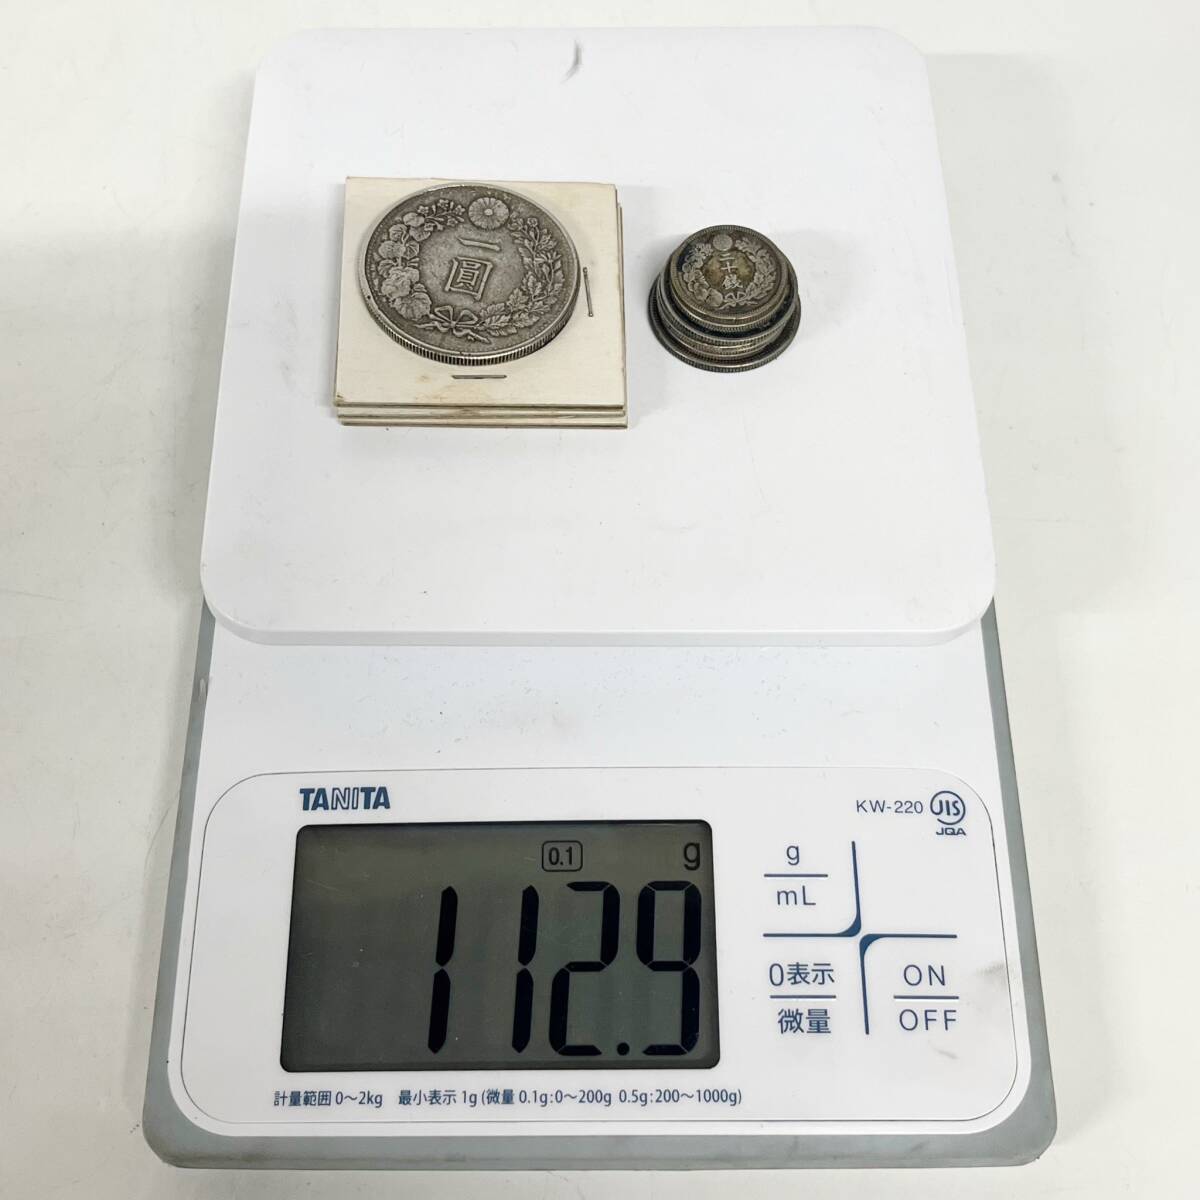 1 jpy ~[ collector discharge goods ] Japan old coin set sale Meiji 3 year Special year asahi day dragon large dragon asahi day small size phoenix 50 sen 20 sen 1 jpy silver coin gross weight 112.9g coin G123271